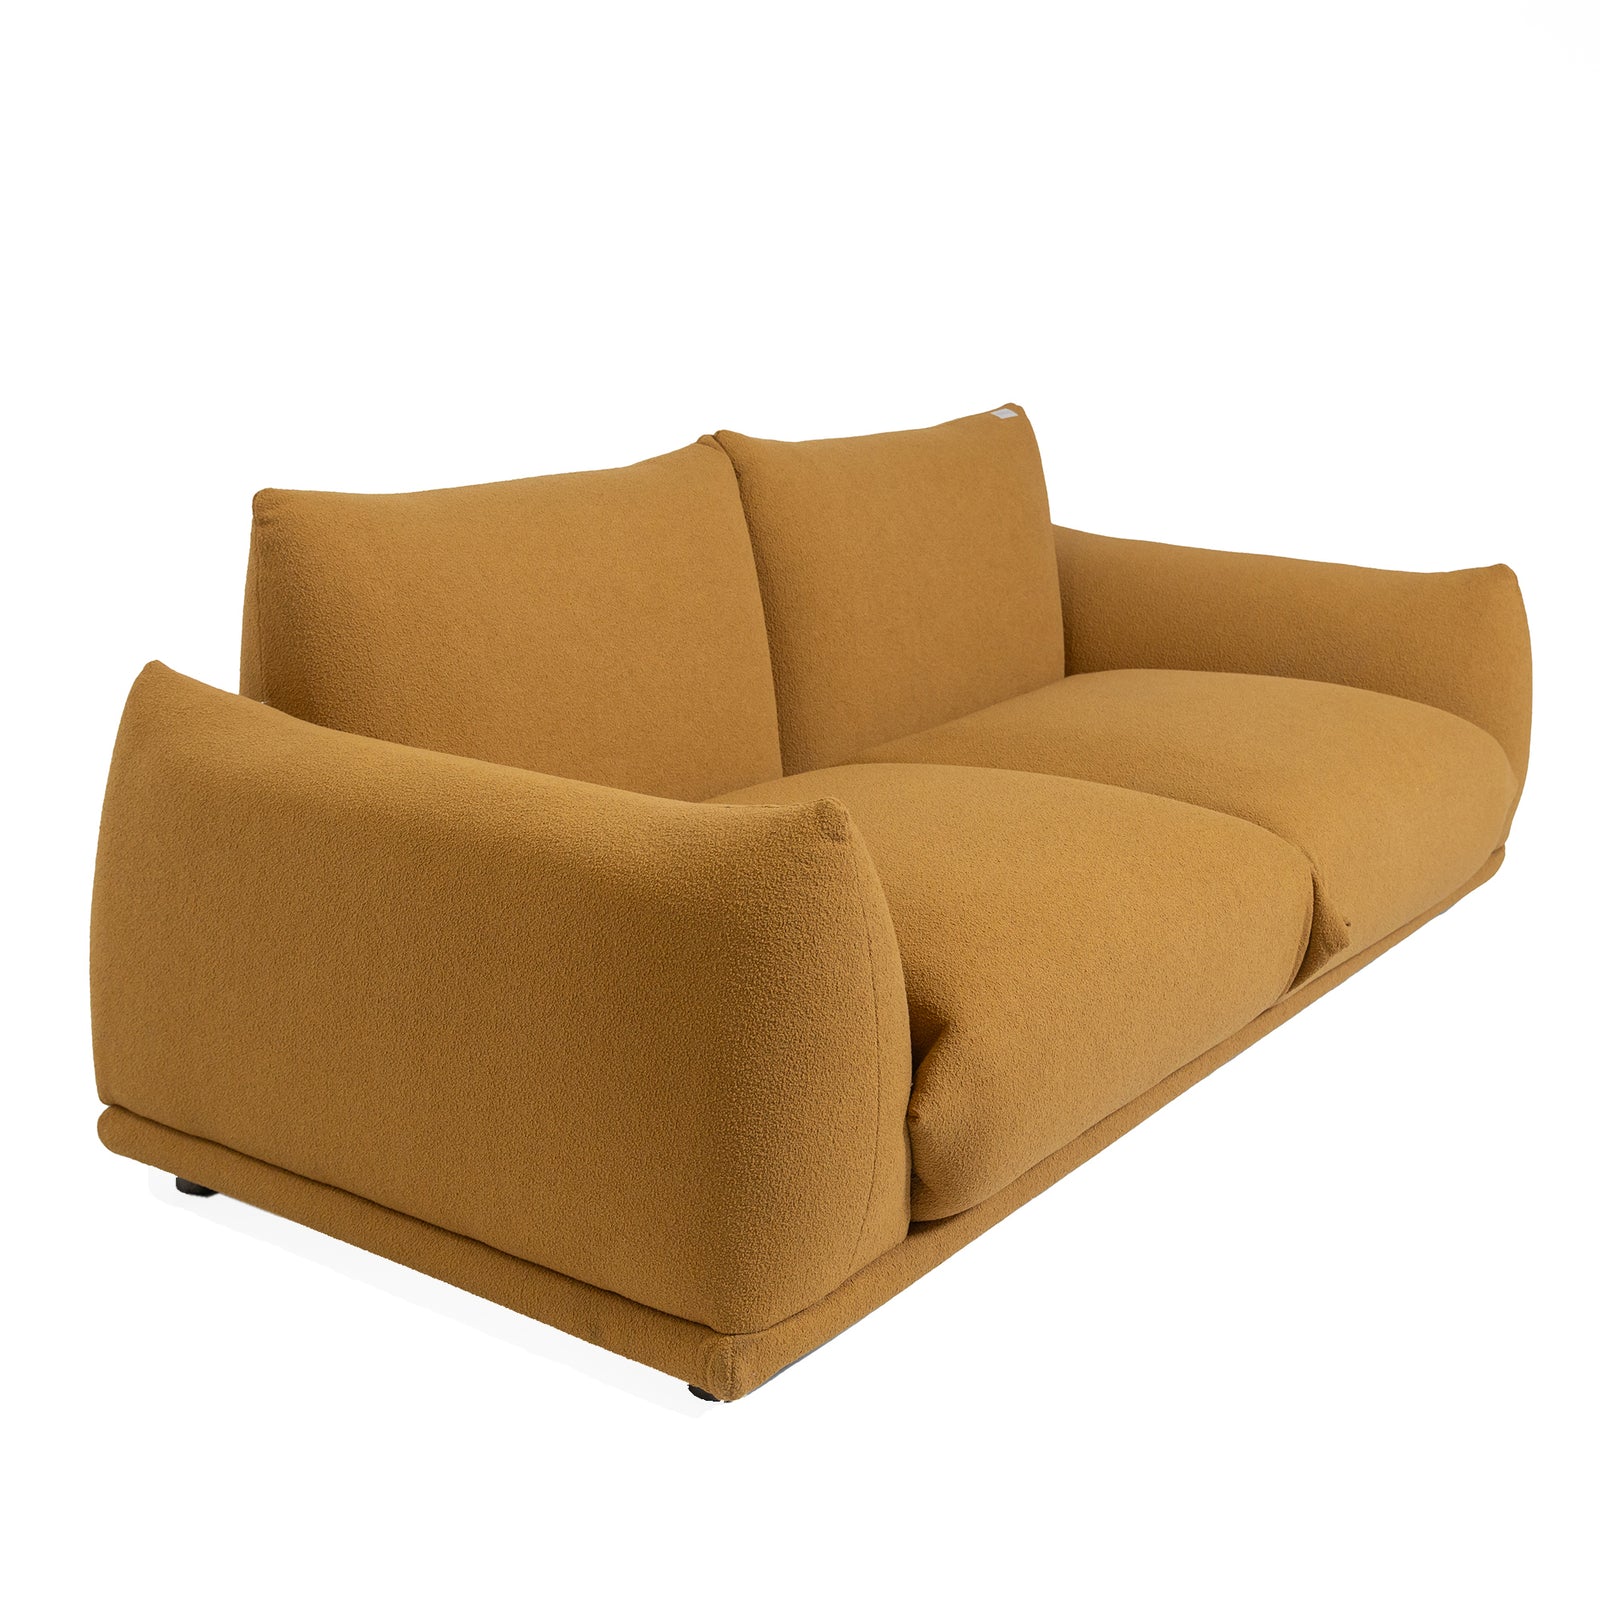 Mario Marenco Style Sofa Ginger Boucle 2 Seater